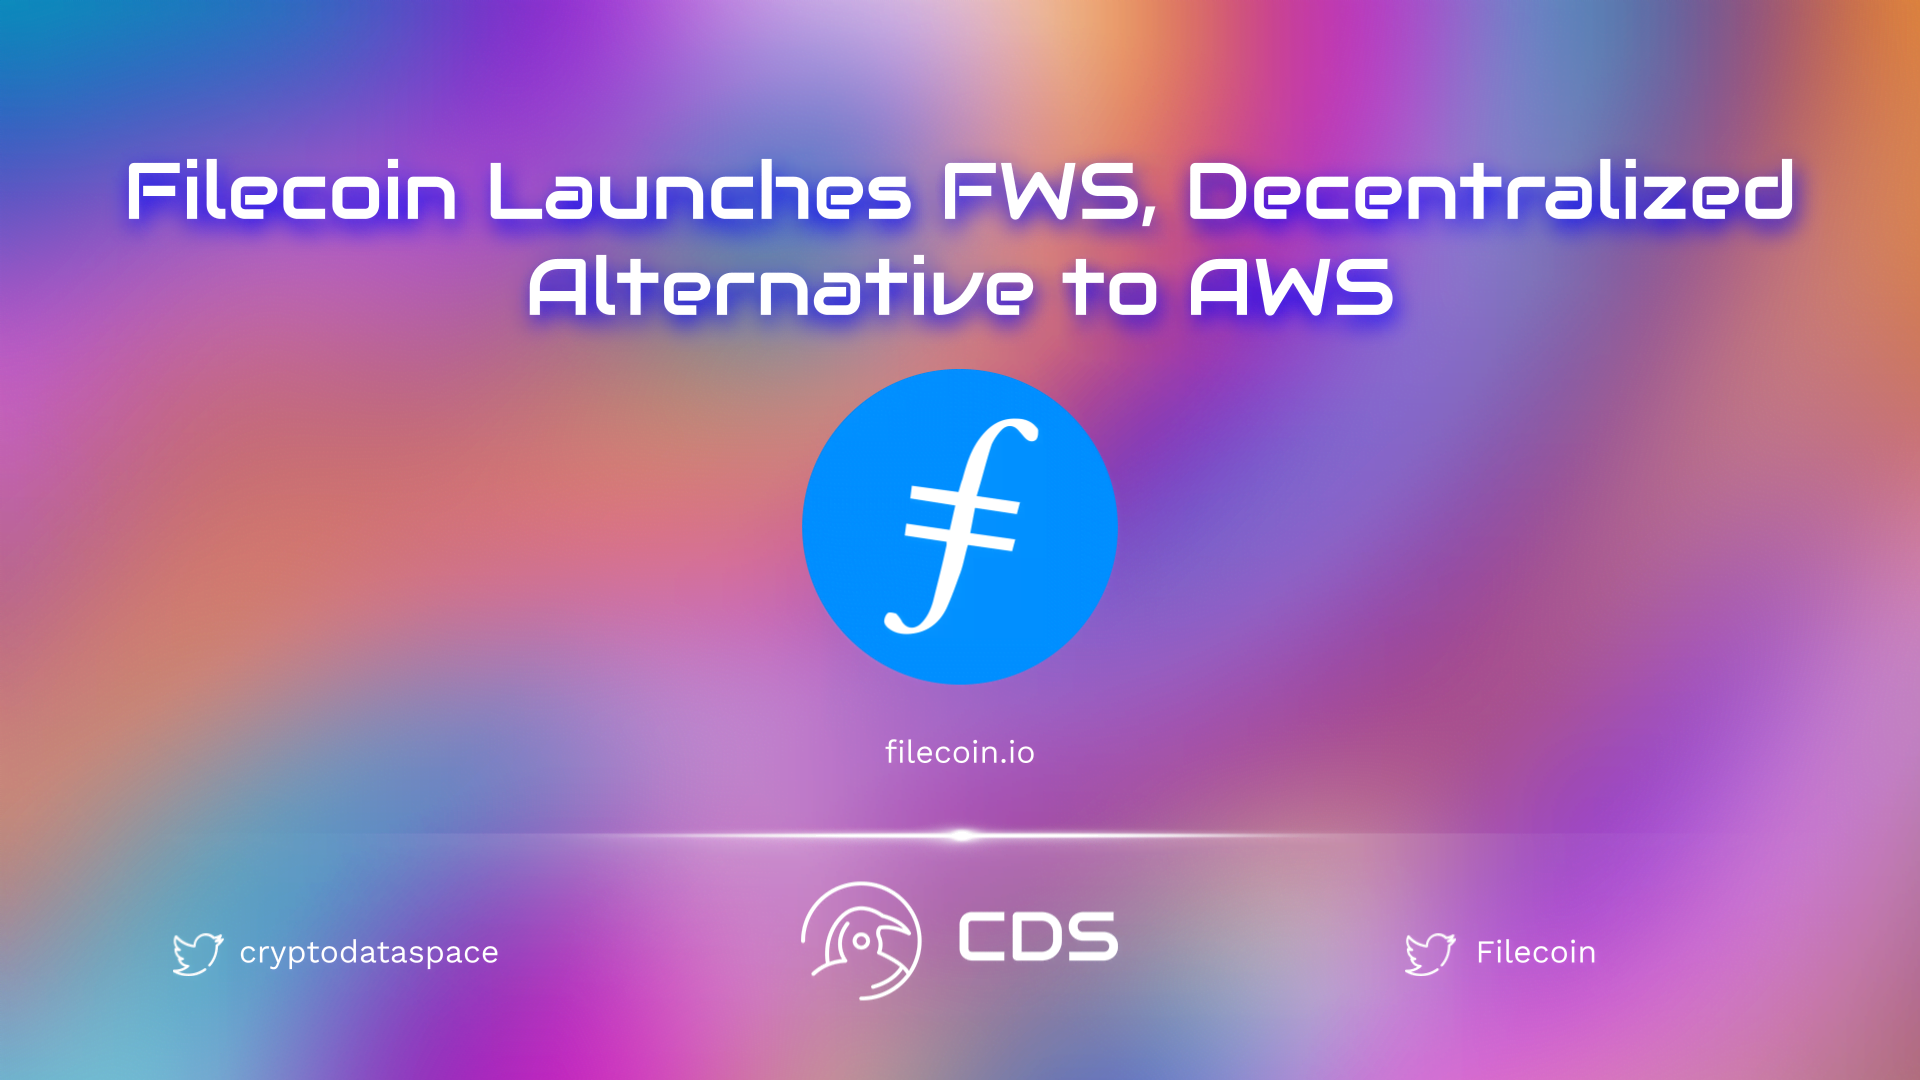 Filecoin Launches Filecoin Web Service (FWS) Decentralized Alternative to AWS